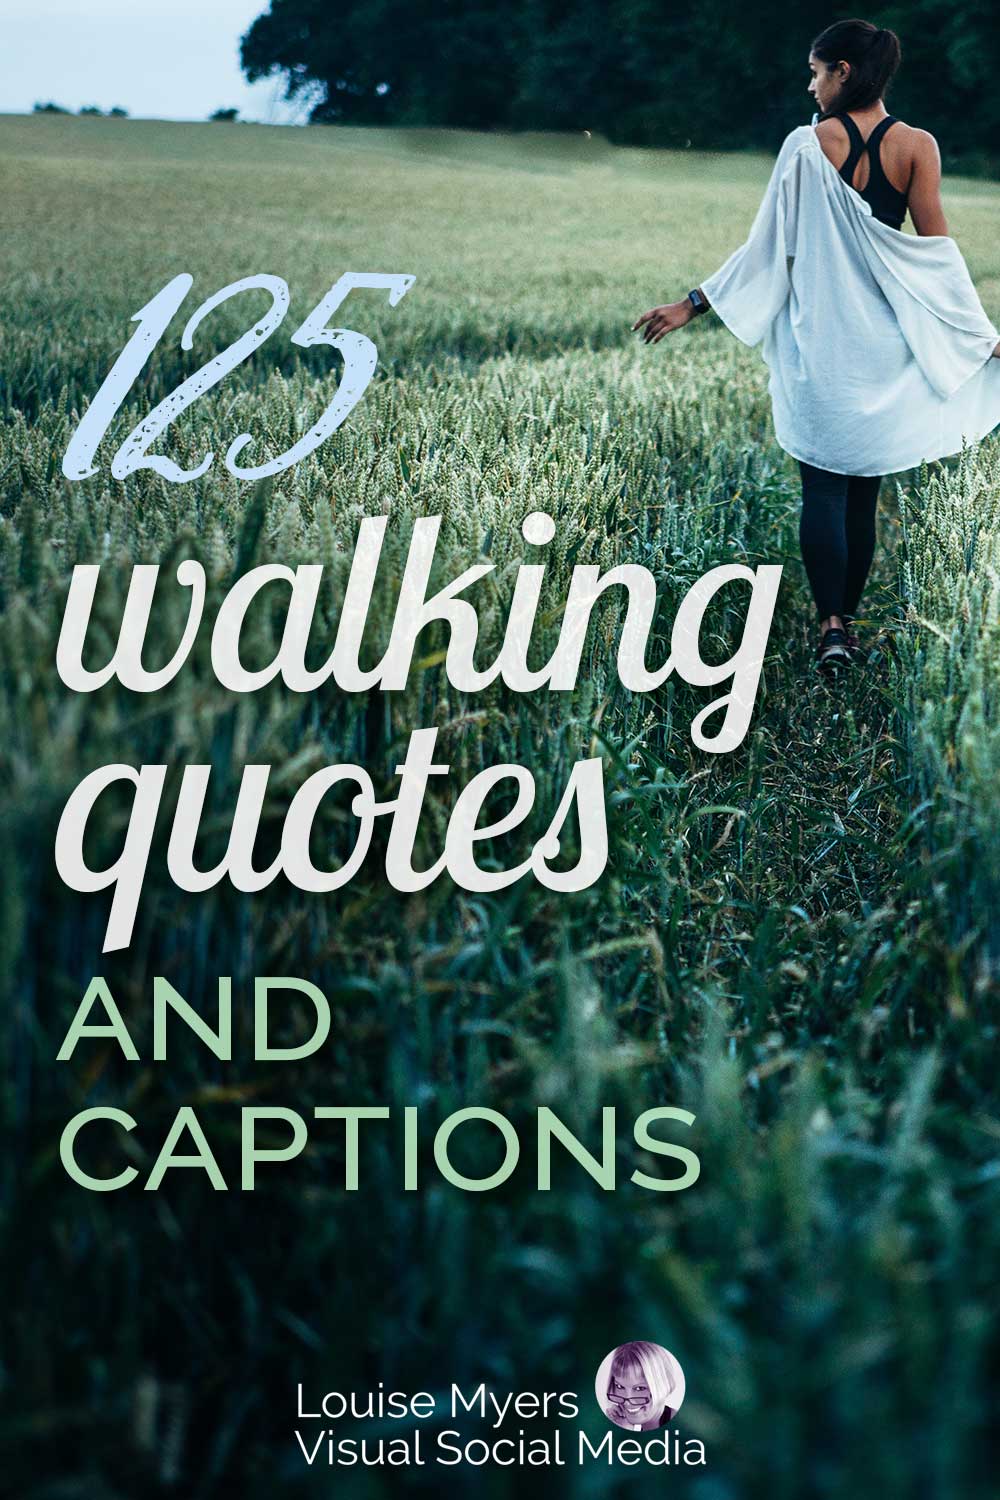 stylish woman walking in field with script 125 walking quotes and captions.